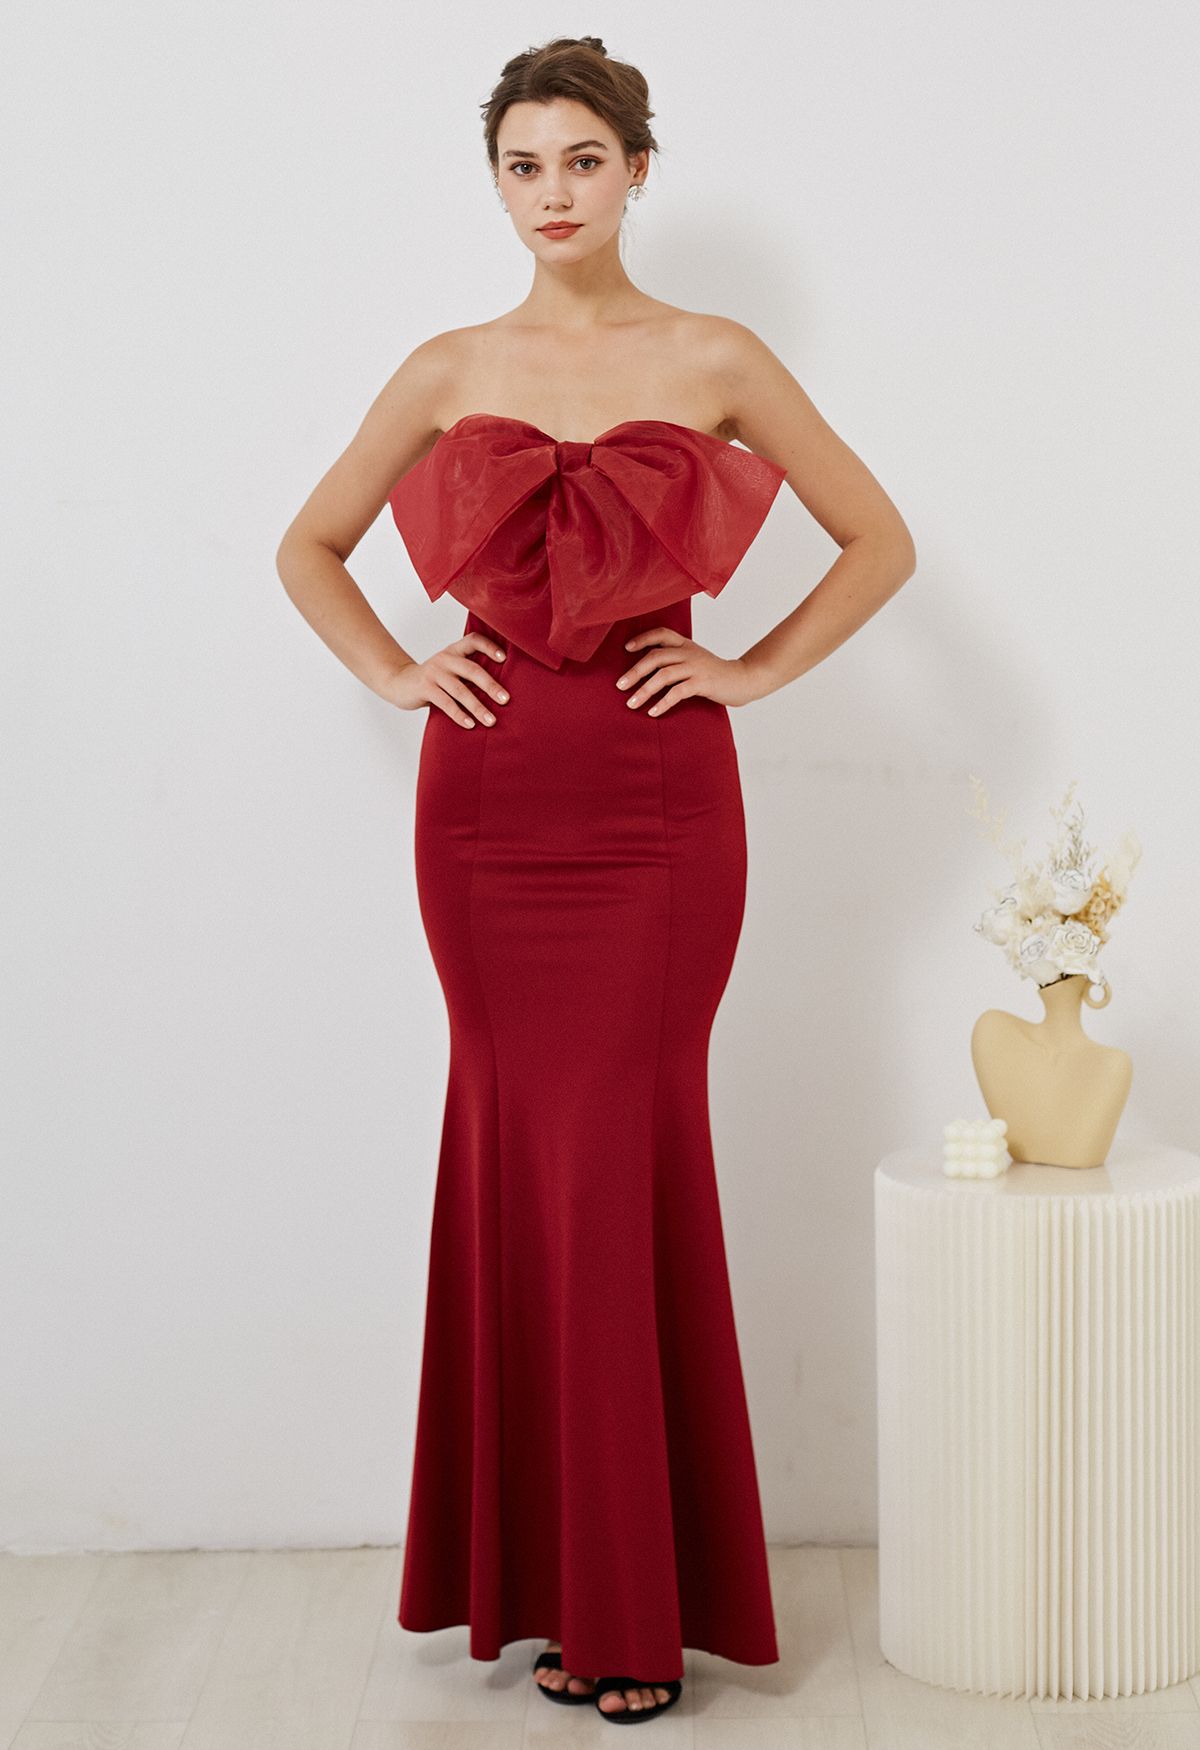 Bowknot Strapless Mermaid Gown in Burgundy